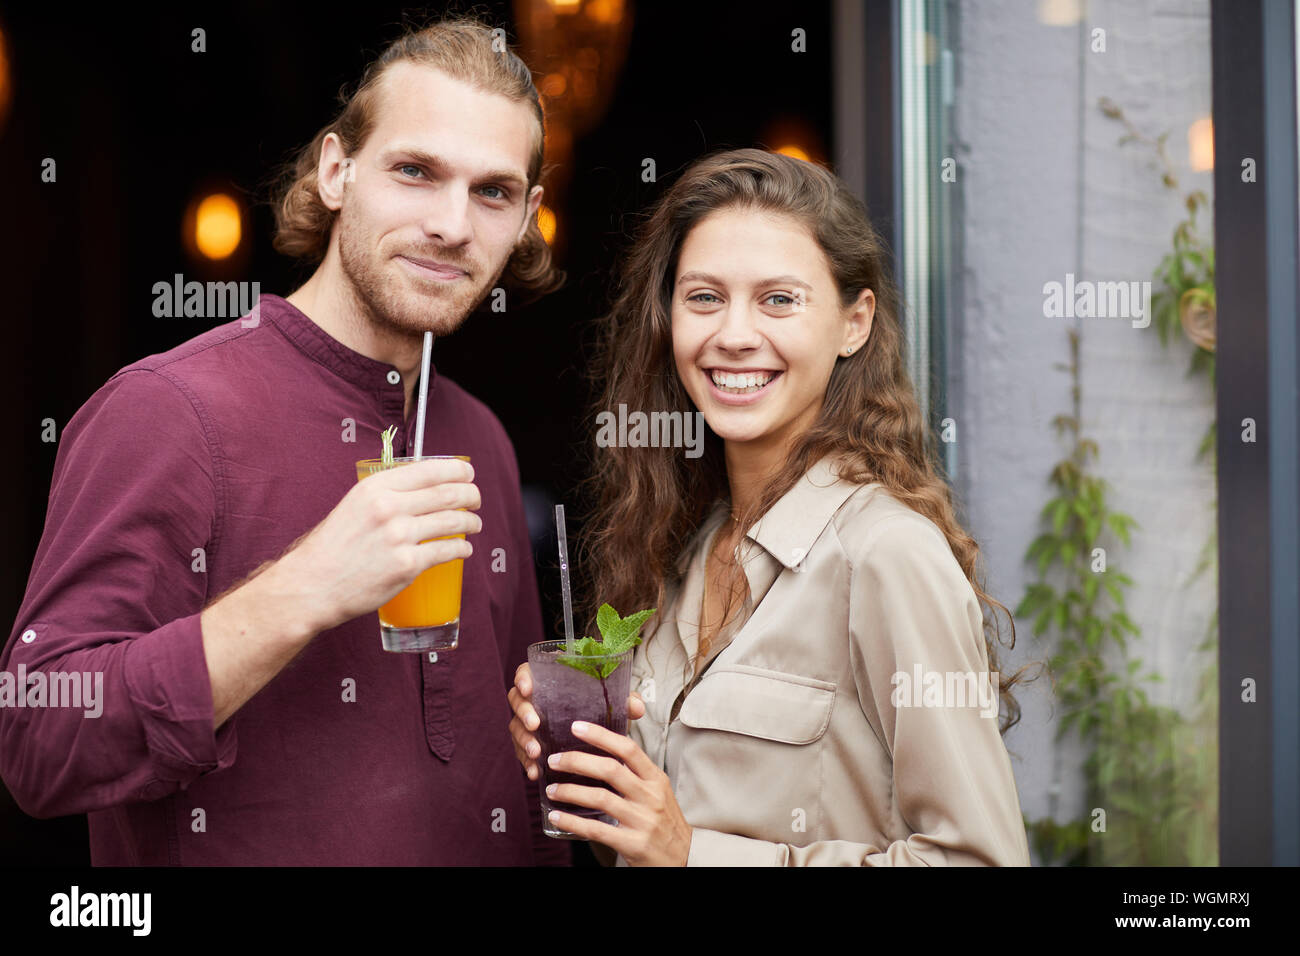 Waist up portrait of beautiful young couple drinking cocktails while posing outdoors standing by cafe, copy space Stock Photo